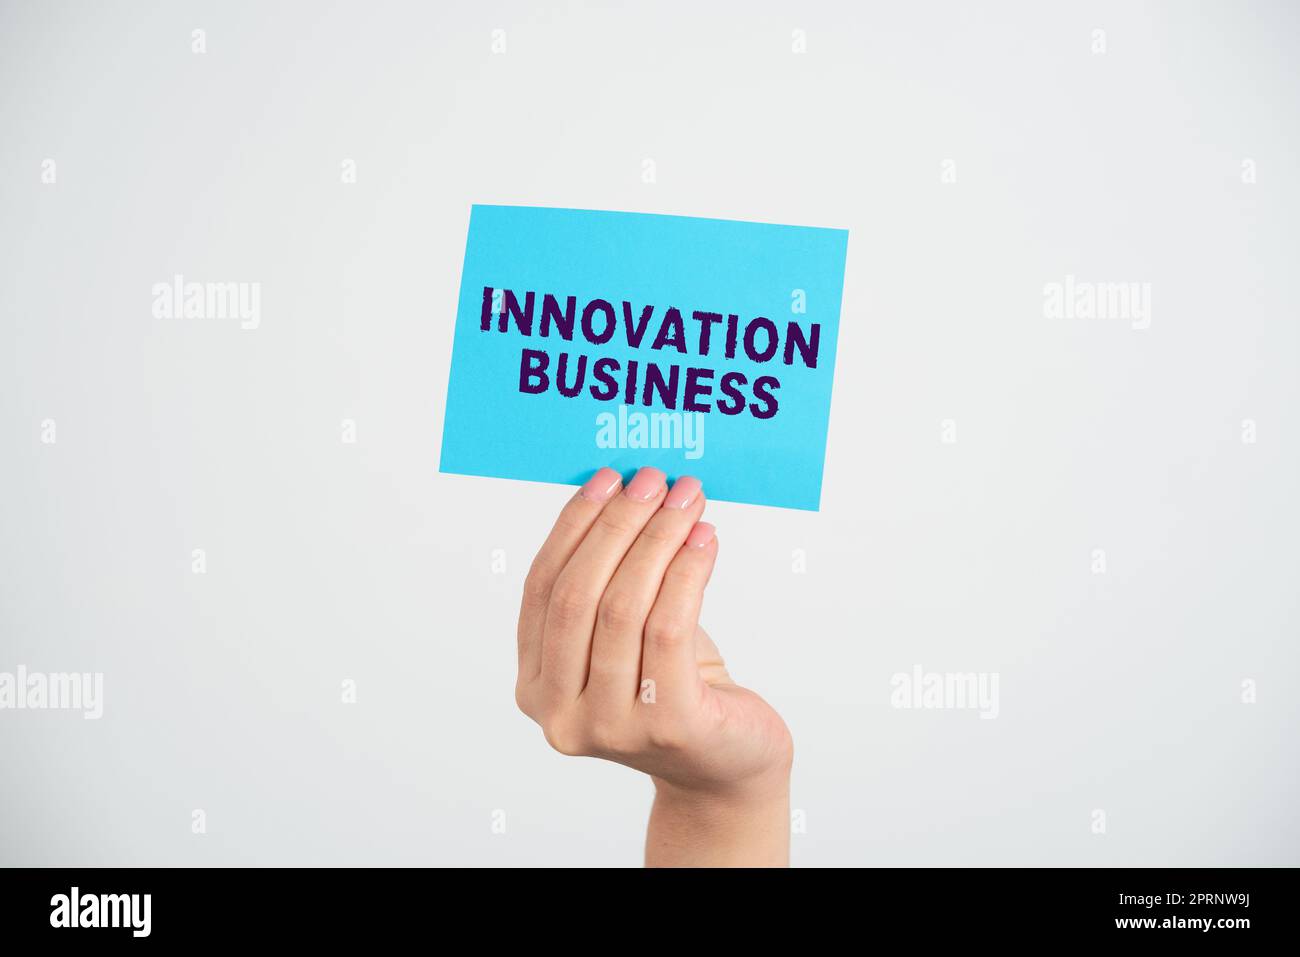 Sign displaying Innovation Business. Business showcase Introduce New Ideas Workflows Methodology Services Stock Photo